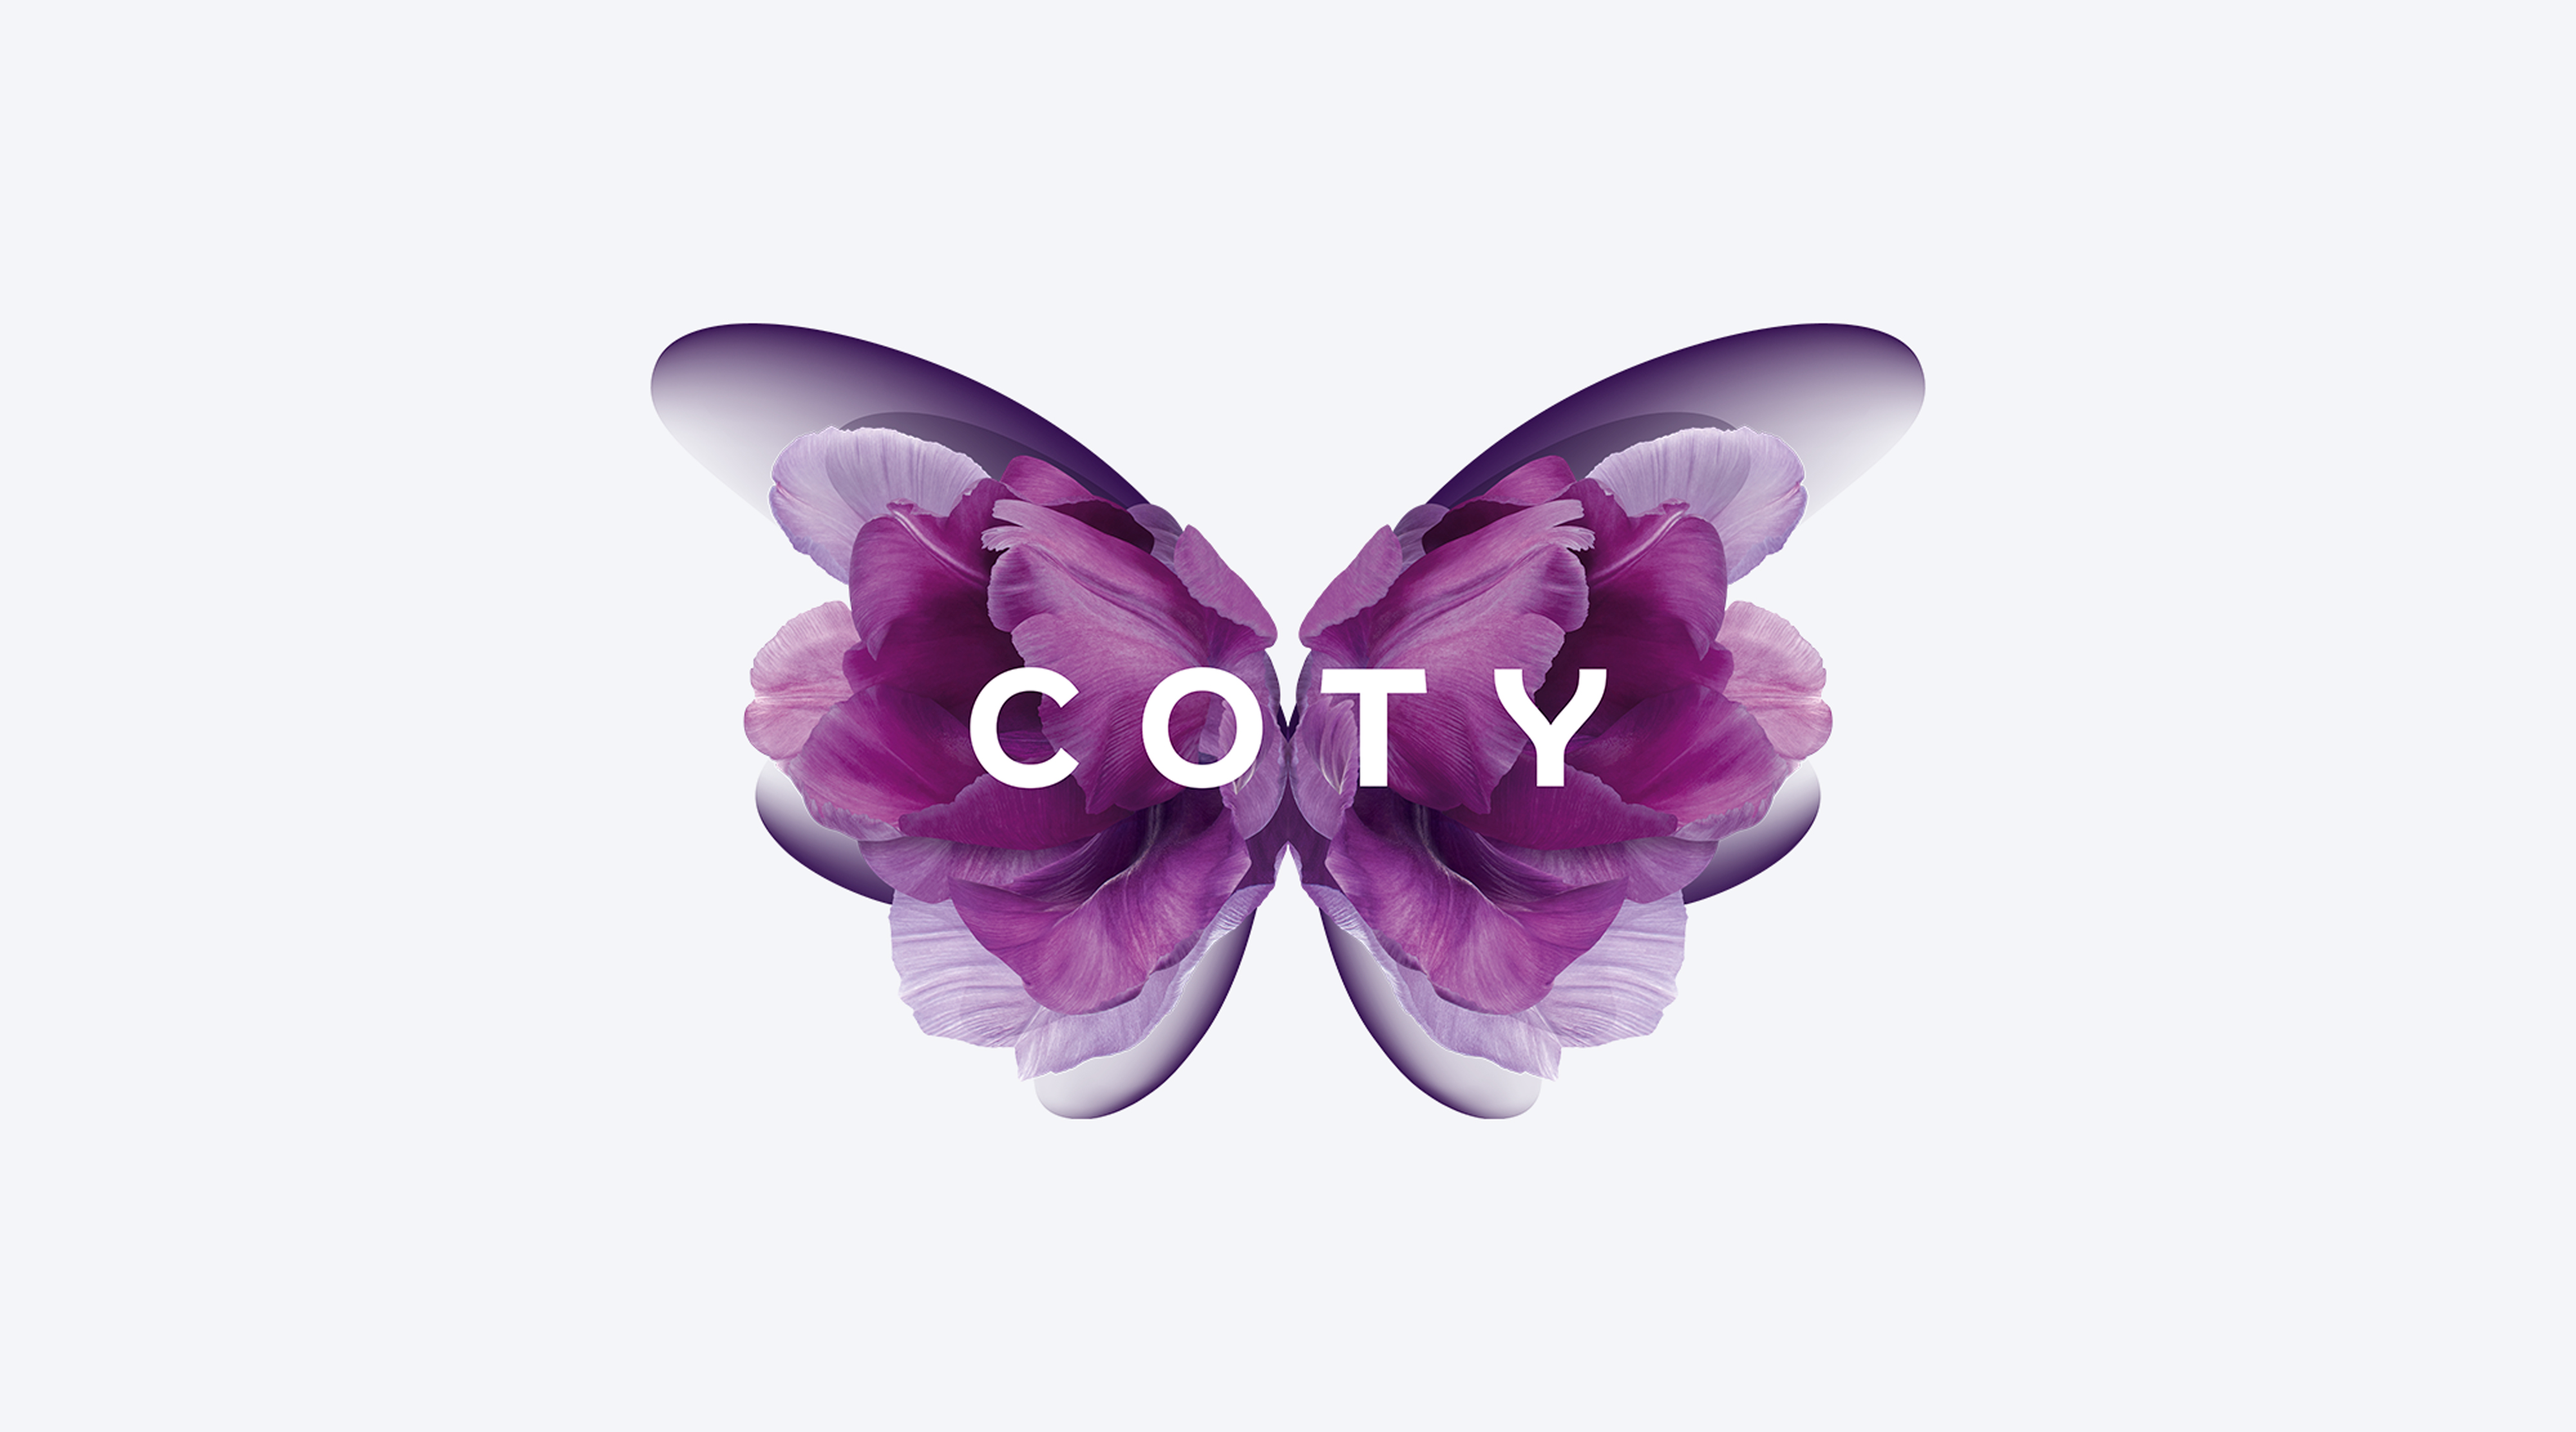 Coty master butterfly image